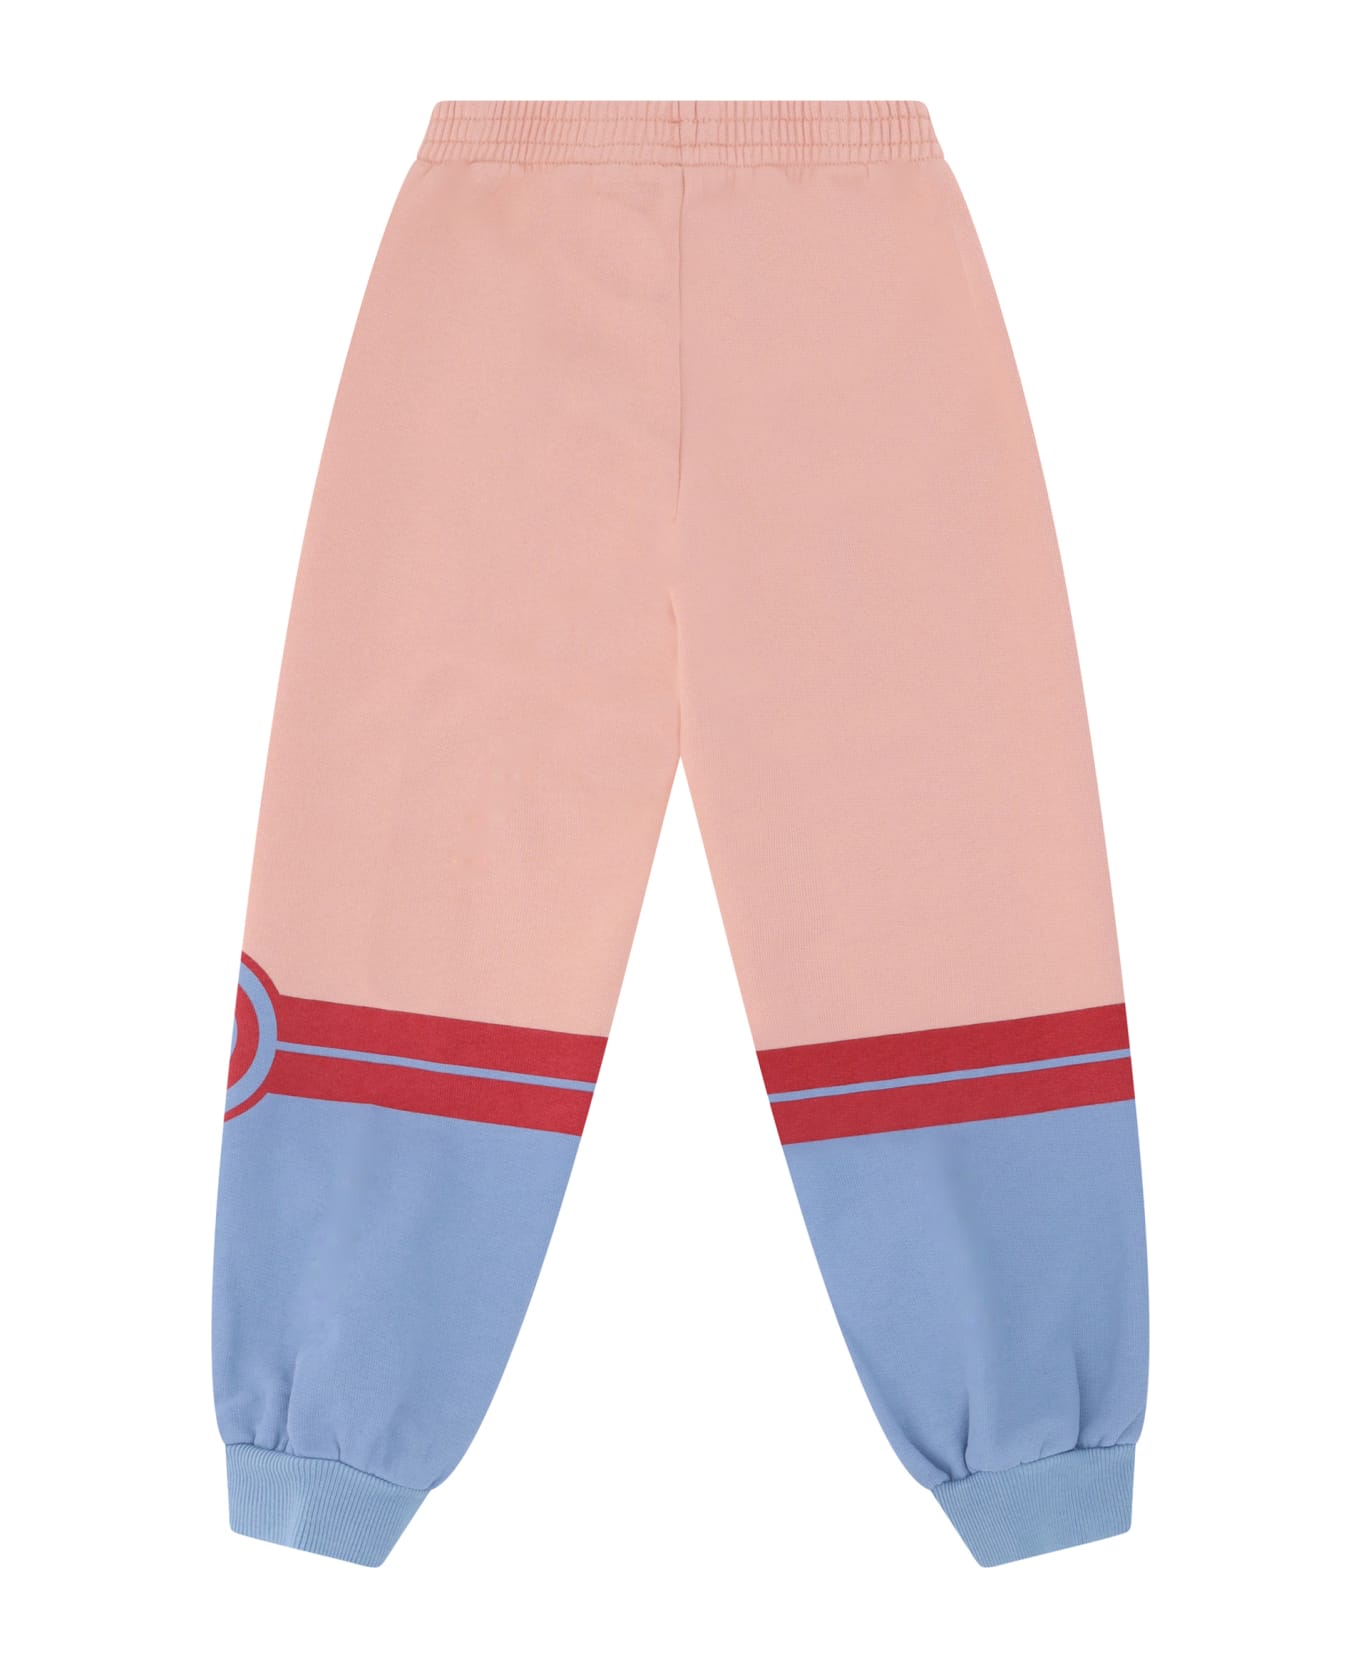 Gucci Pants For Girl - Pink/sky/tulips ボトムス